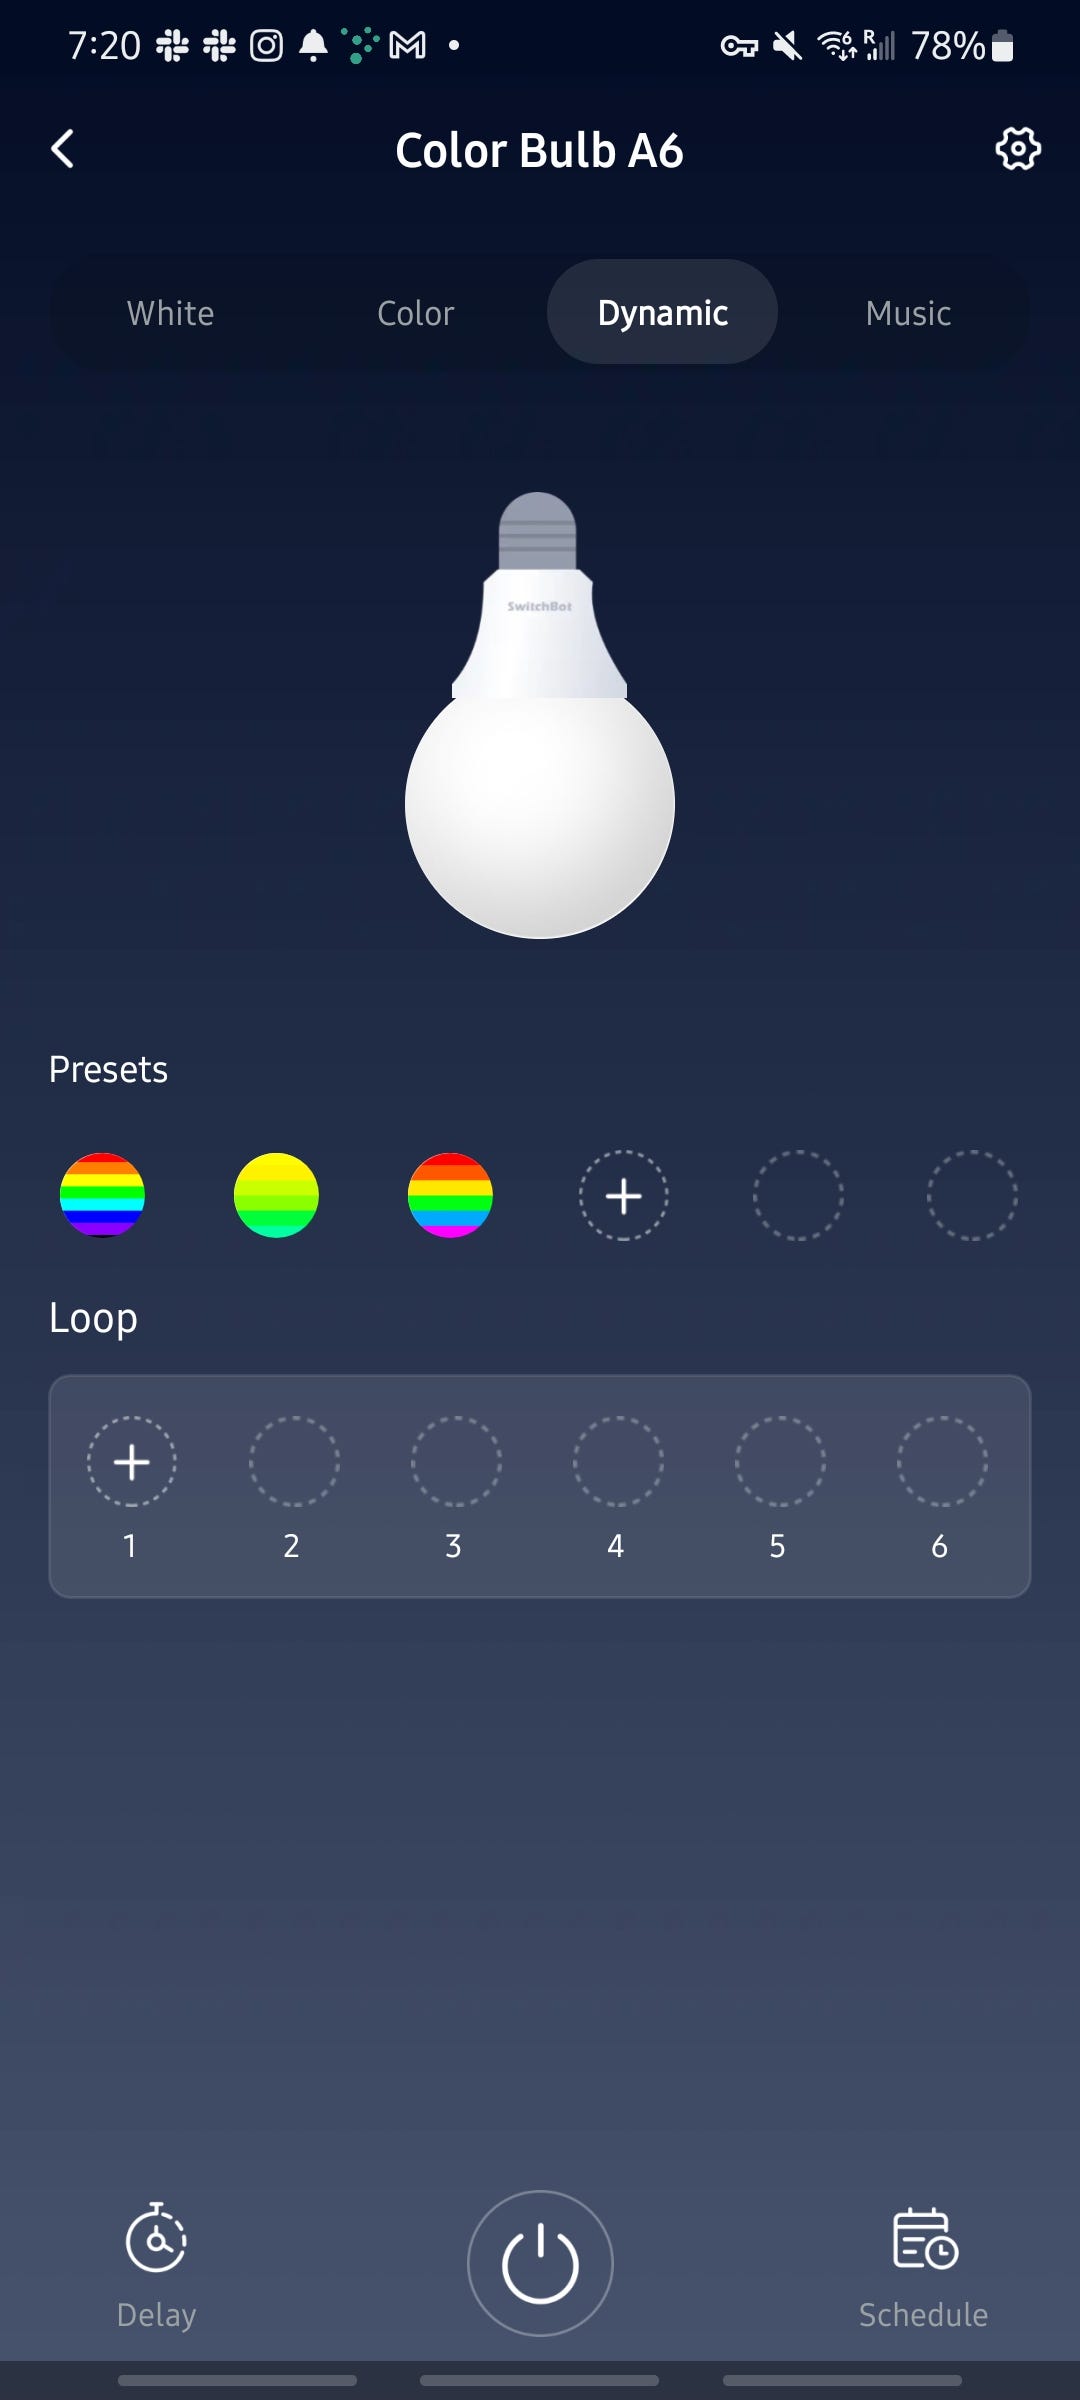 Dynamic presets for the SwitchBot Color Bulb